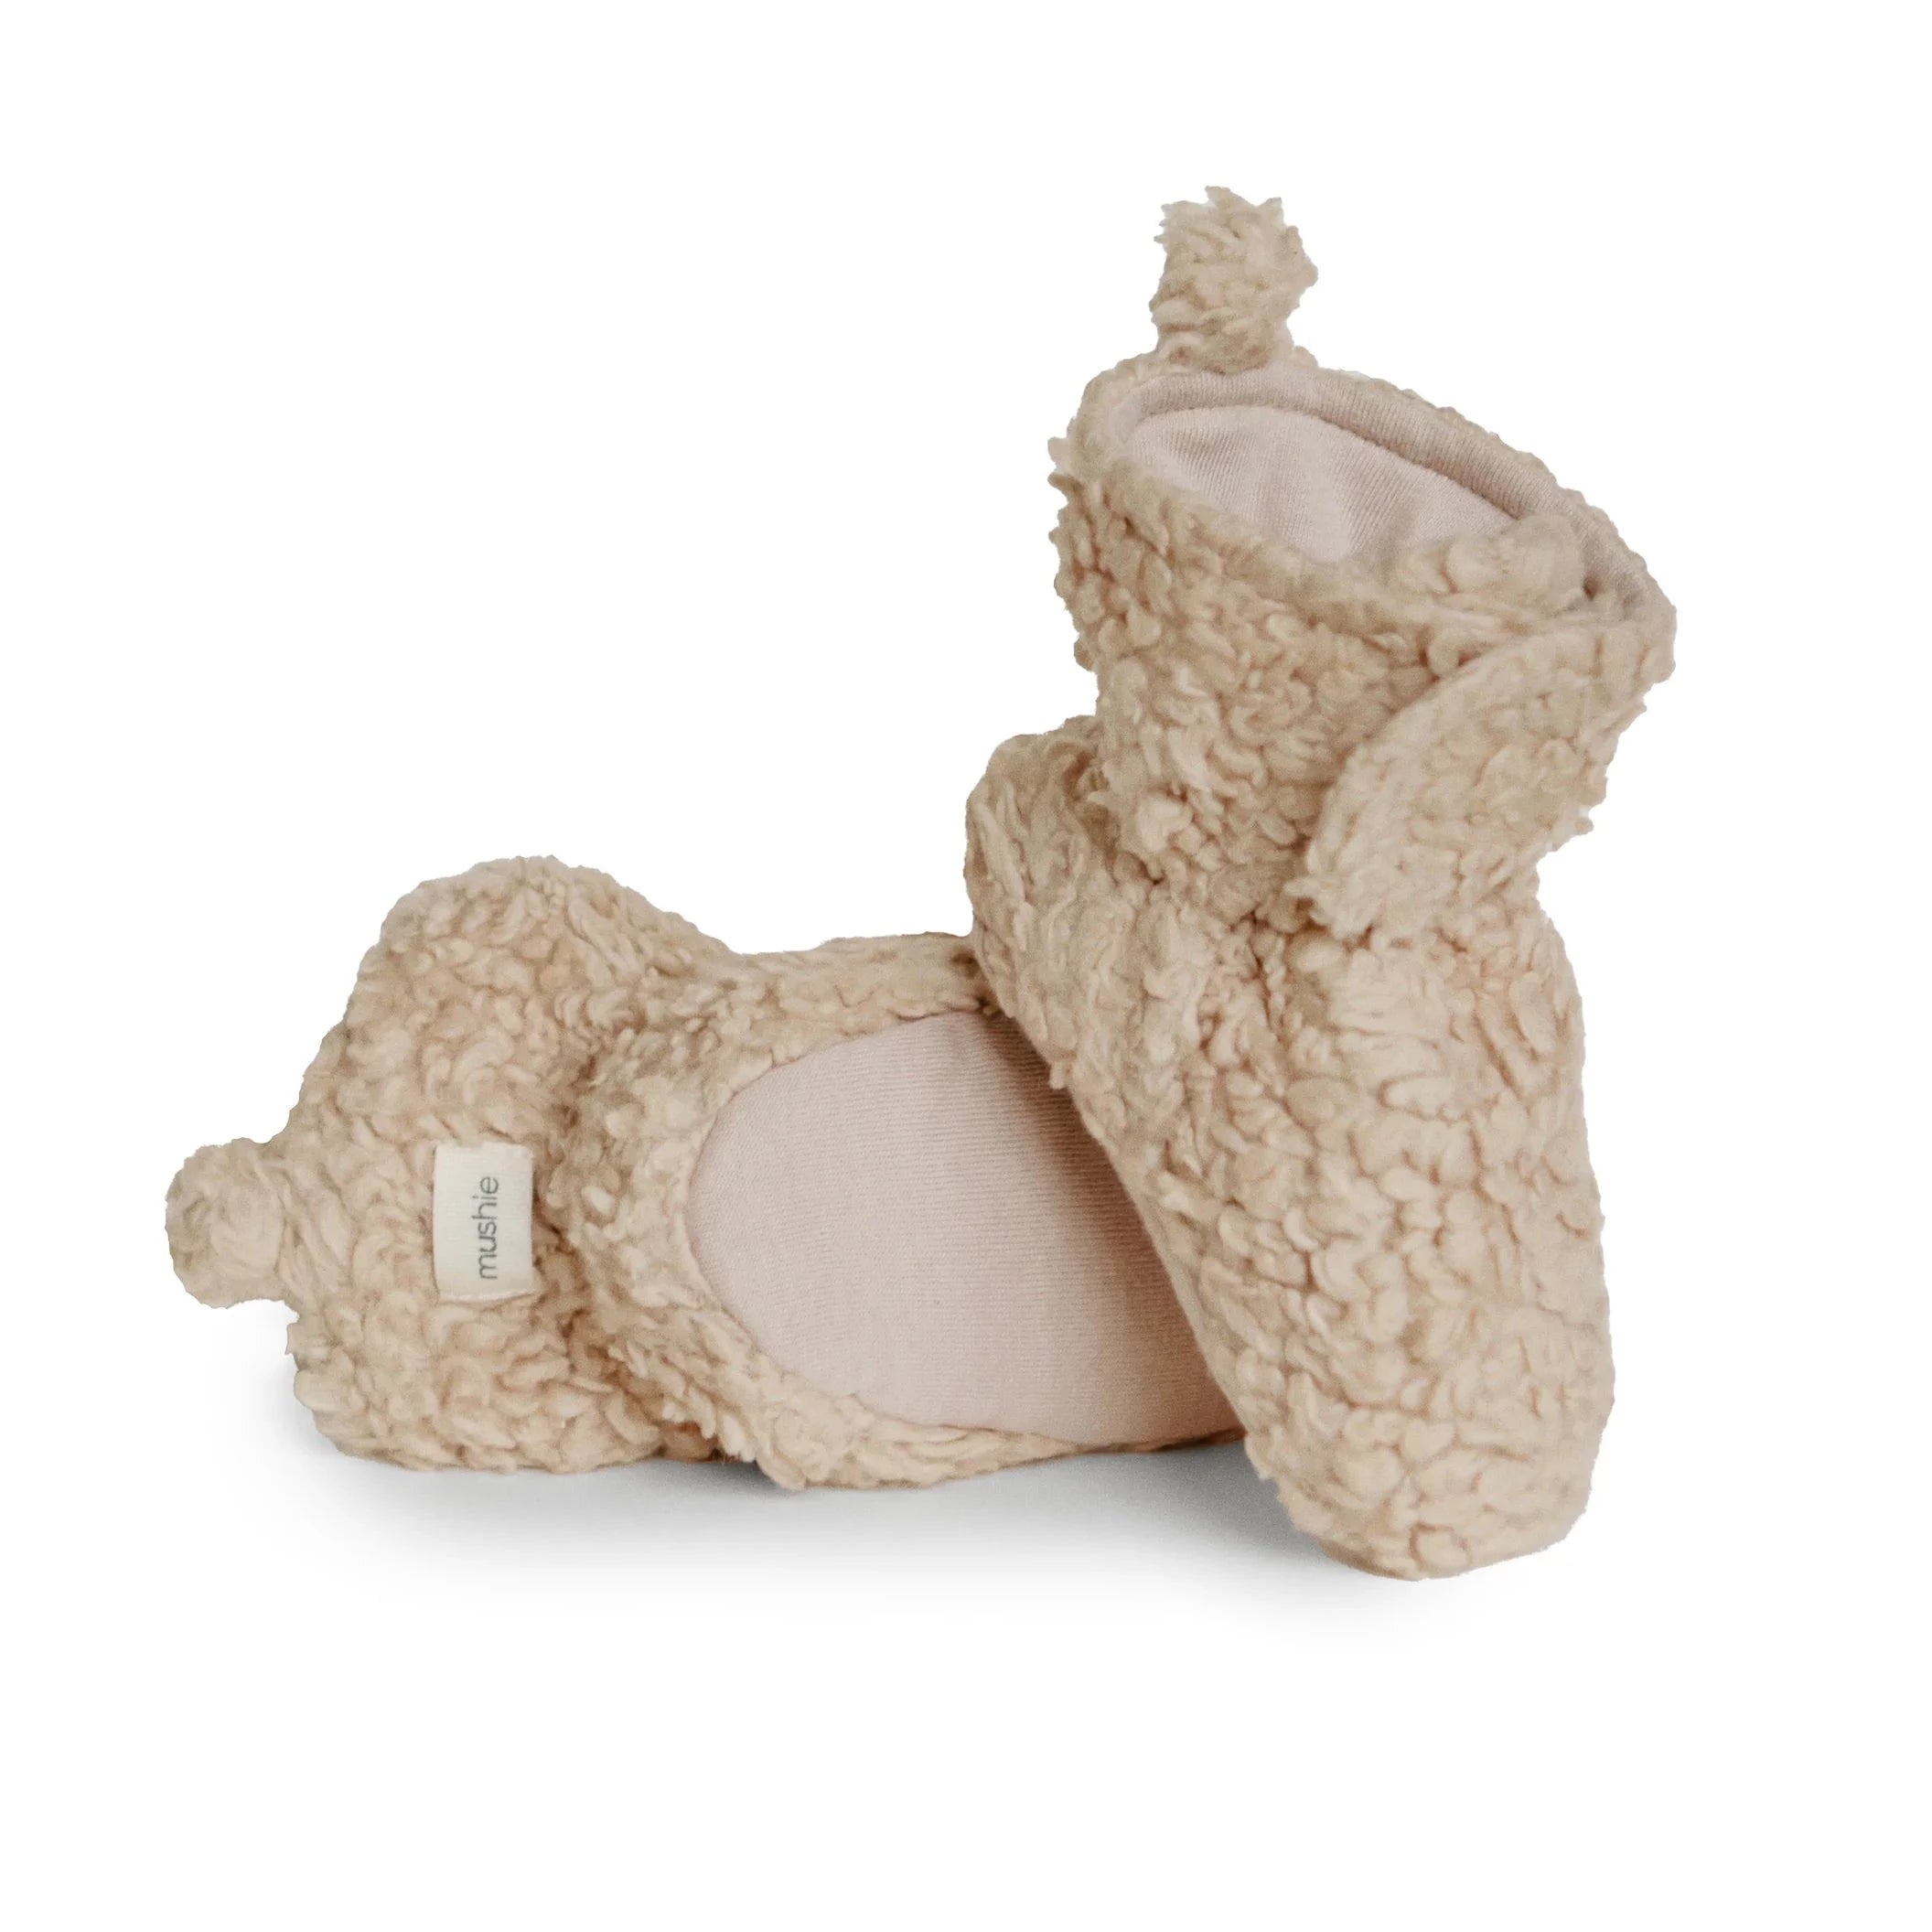 light brow fuzzy booties. back of booties have beige mushie tag. booties have velcro strap in the front